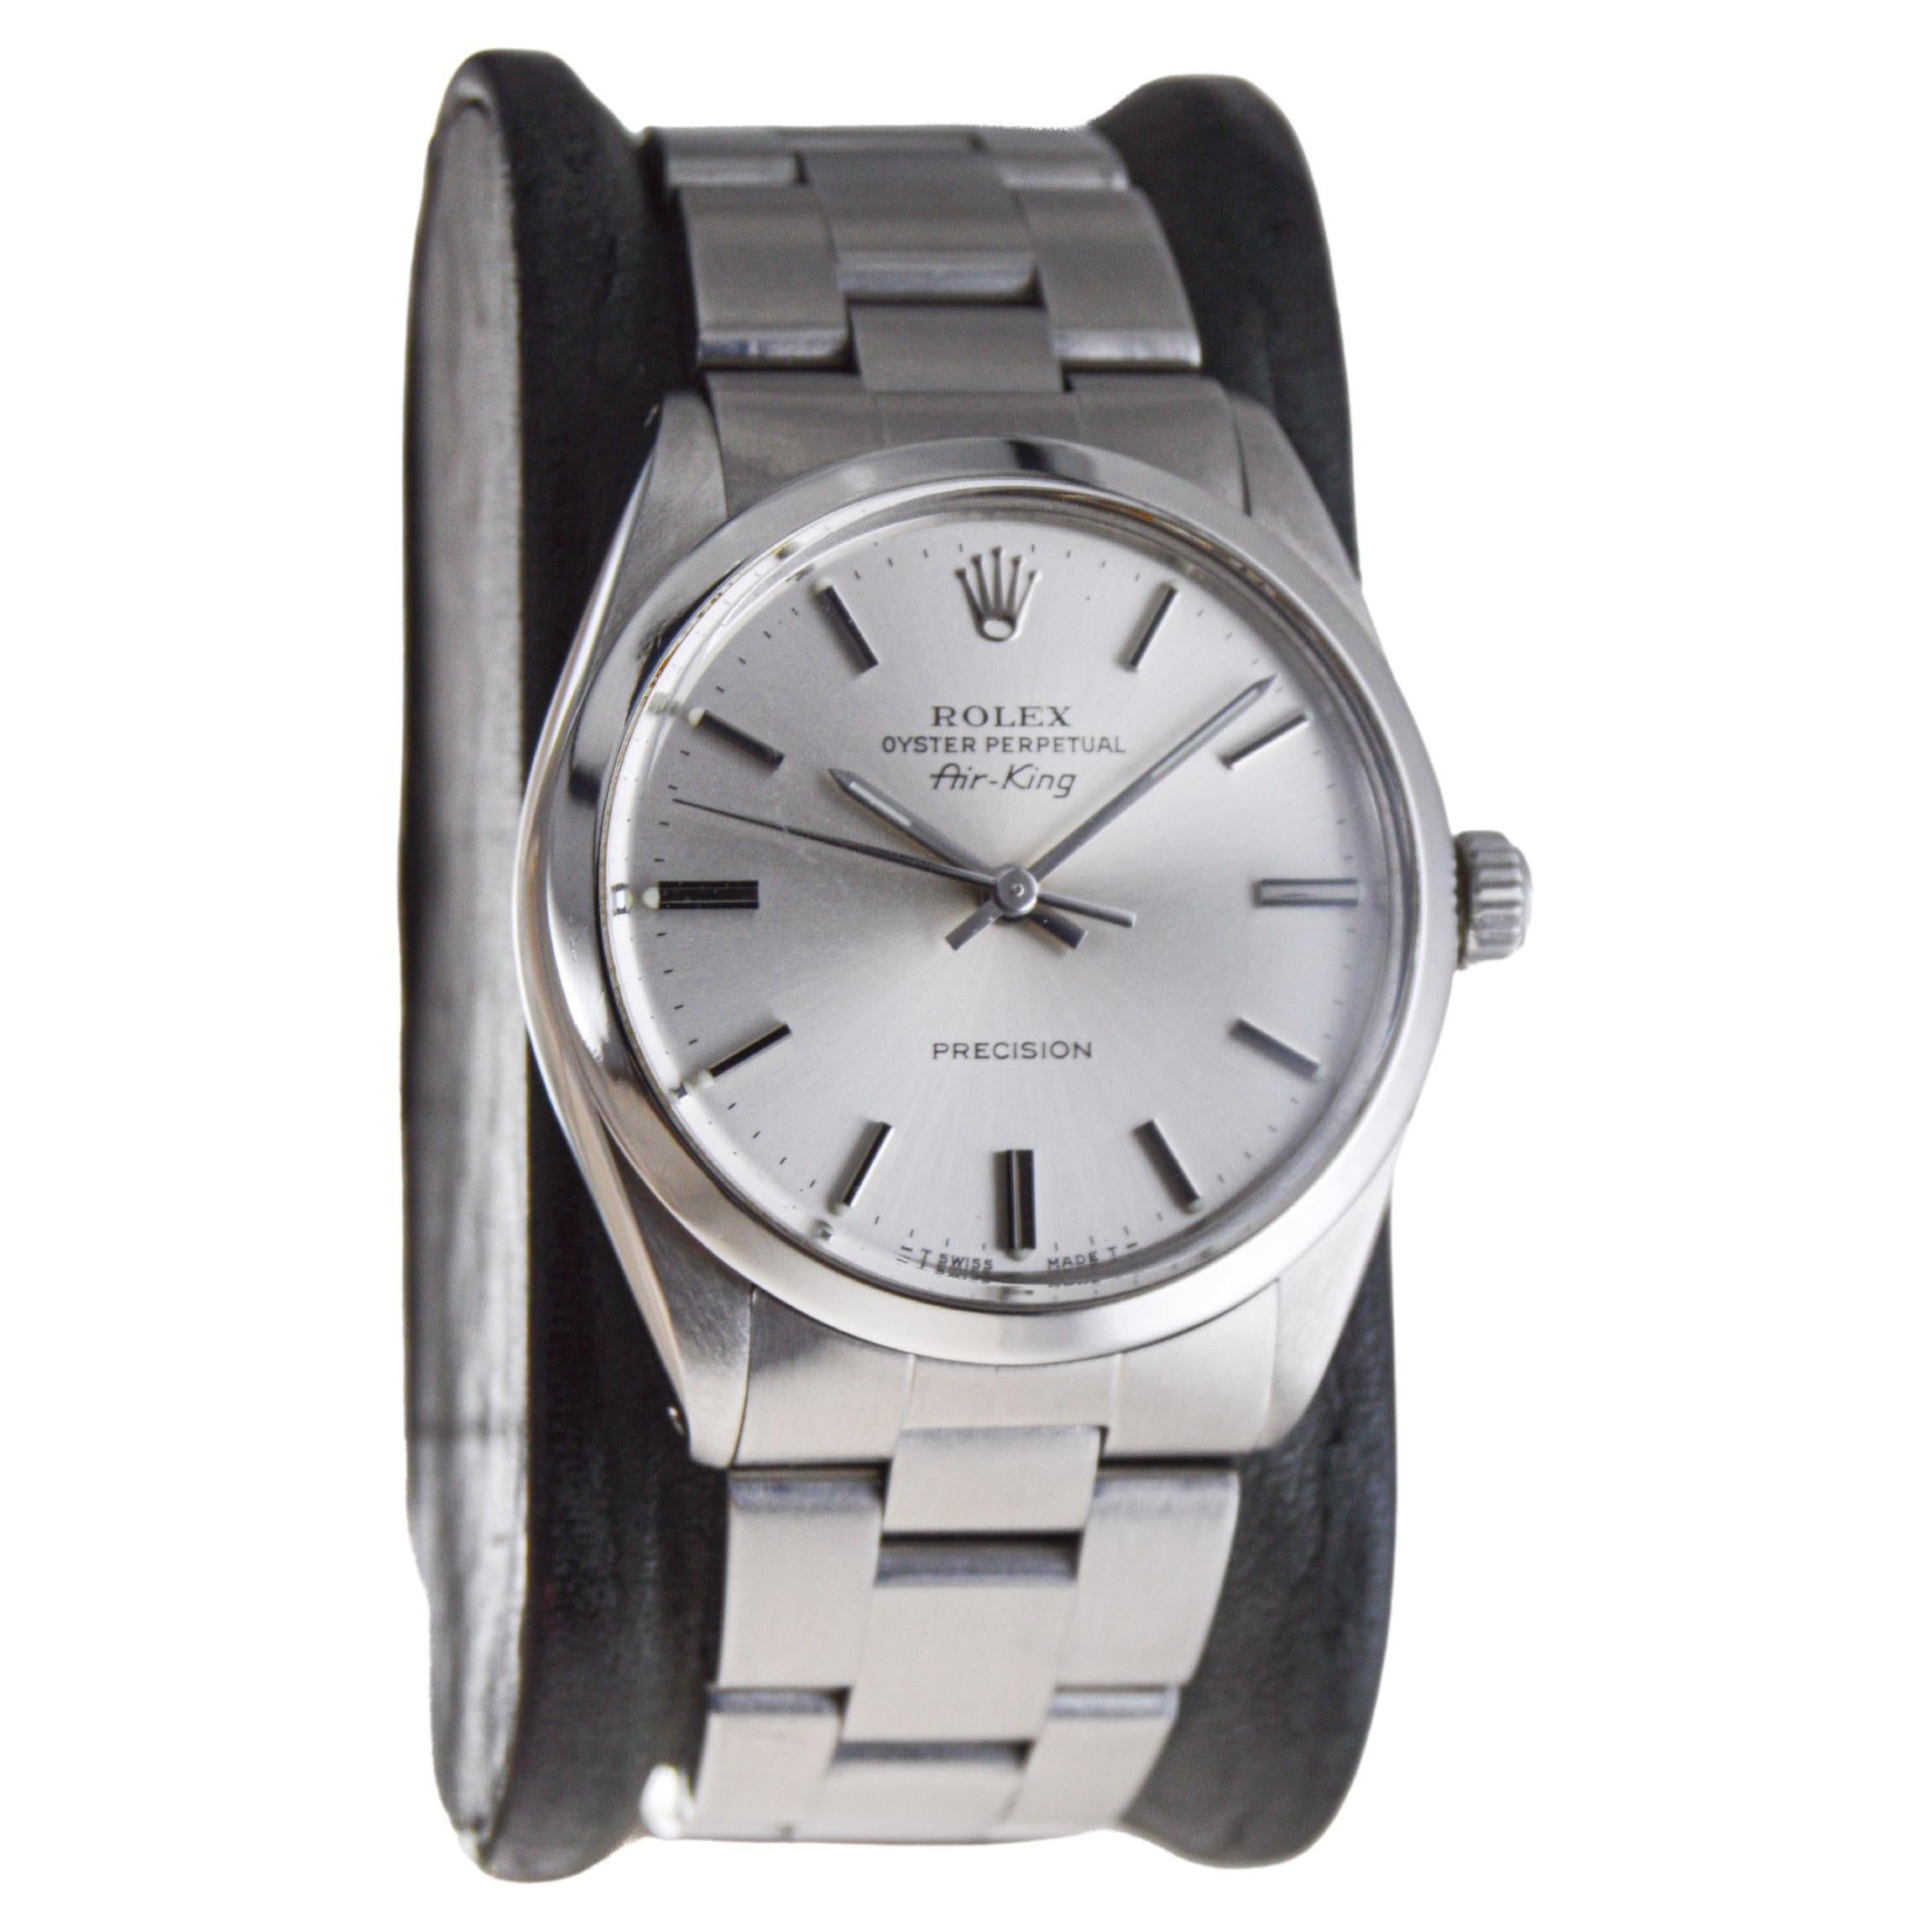 FACTORY / HOUSE: Rolex Watch Company
STYLE / REFERENCE: Air King / Reference 5500
METAL / MATERIAL: Stainless Steel
CIRCA / YEAR: 1988
DIMENSIONS / SIZE: Length 39mm X Diameter 34mm
MOVEMENT / CALIBER: Perpetual Winding / 26 Jewels / Caliber